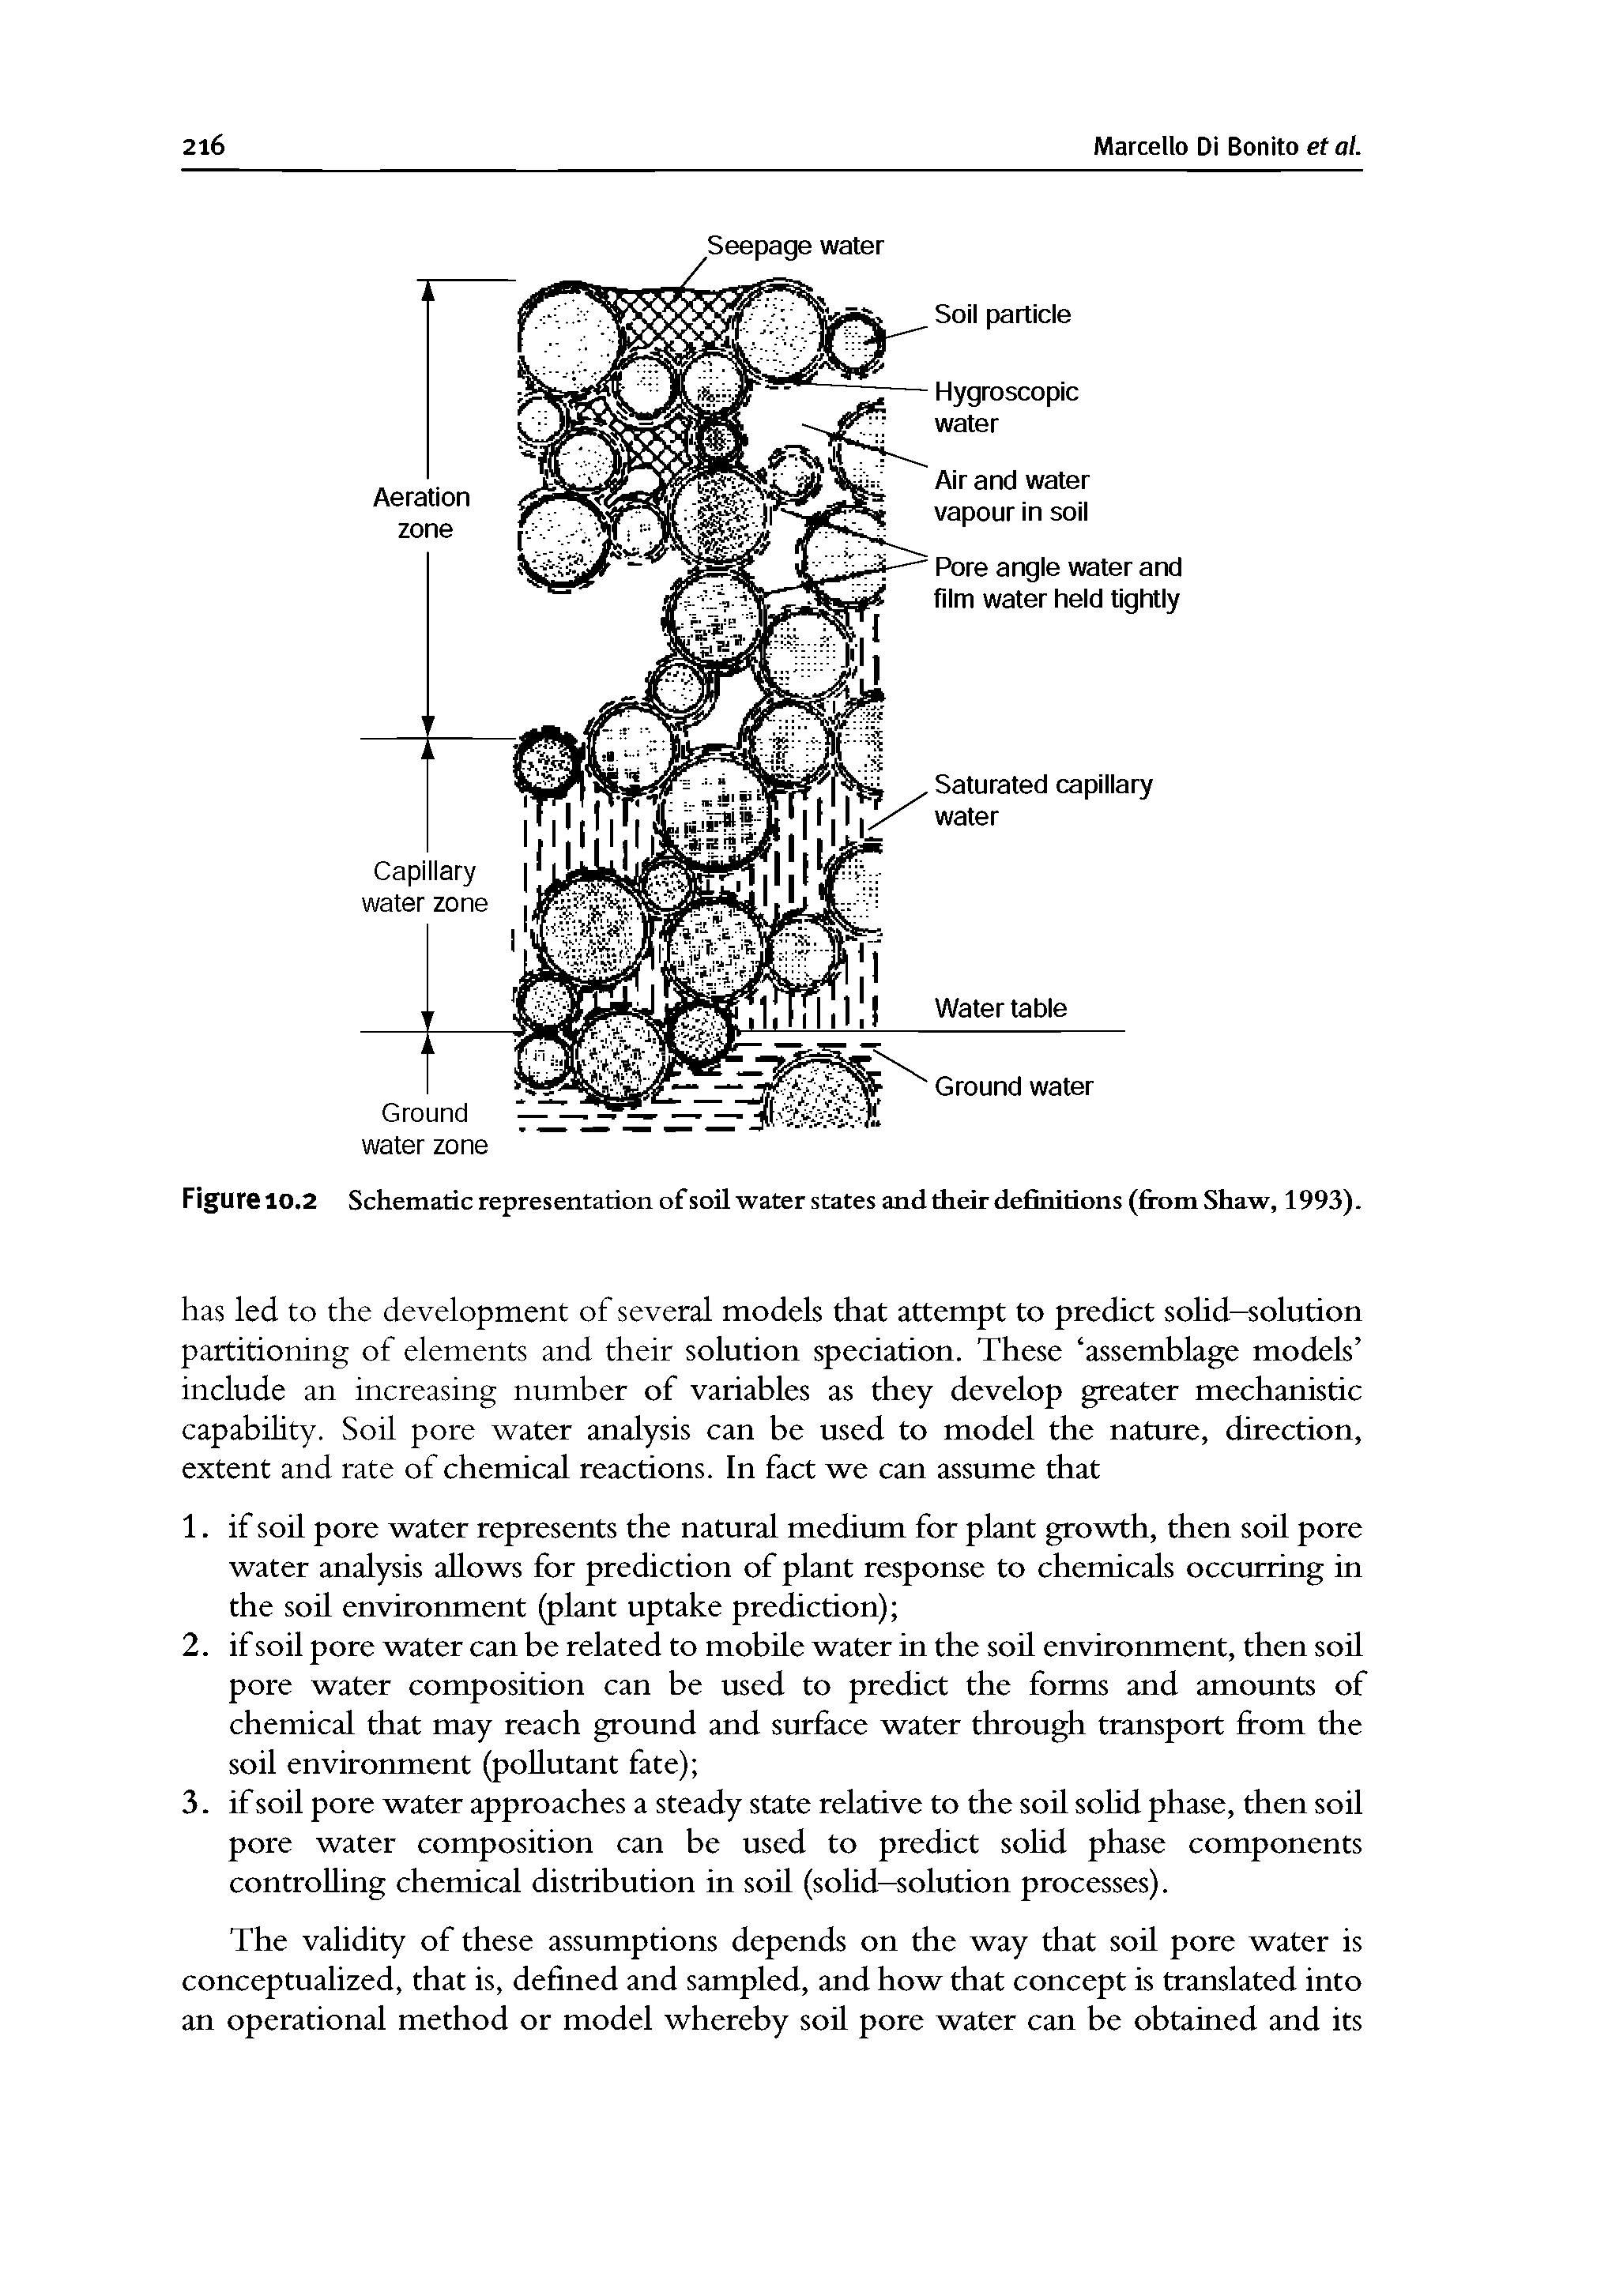 Figure 10.2 Schematic representation of soil water states and their definitions (from Shaw, 1993).